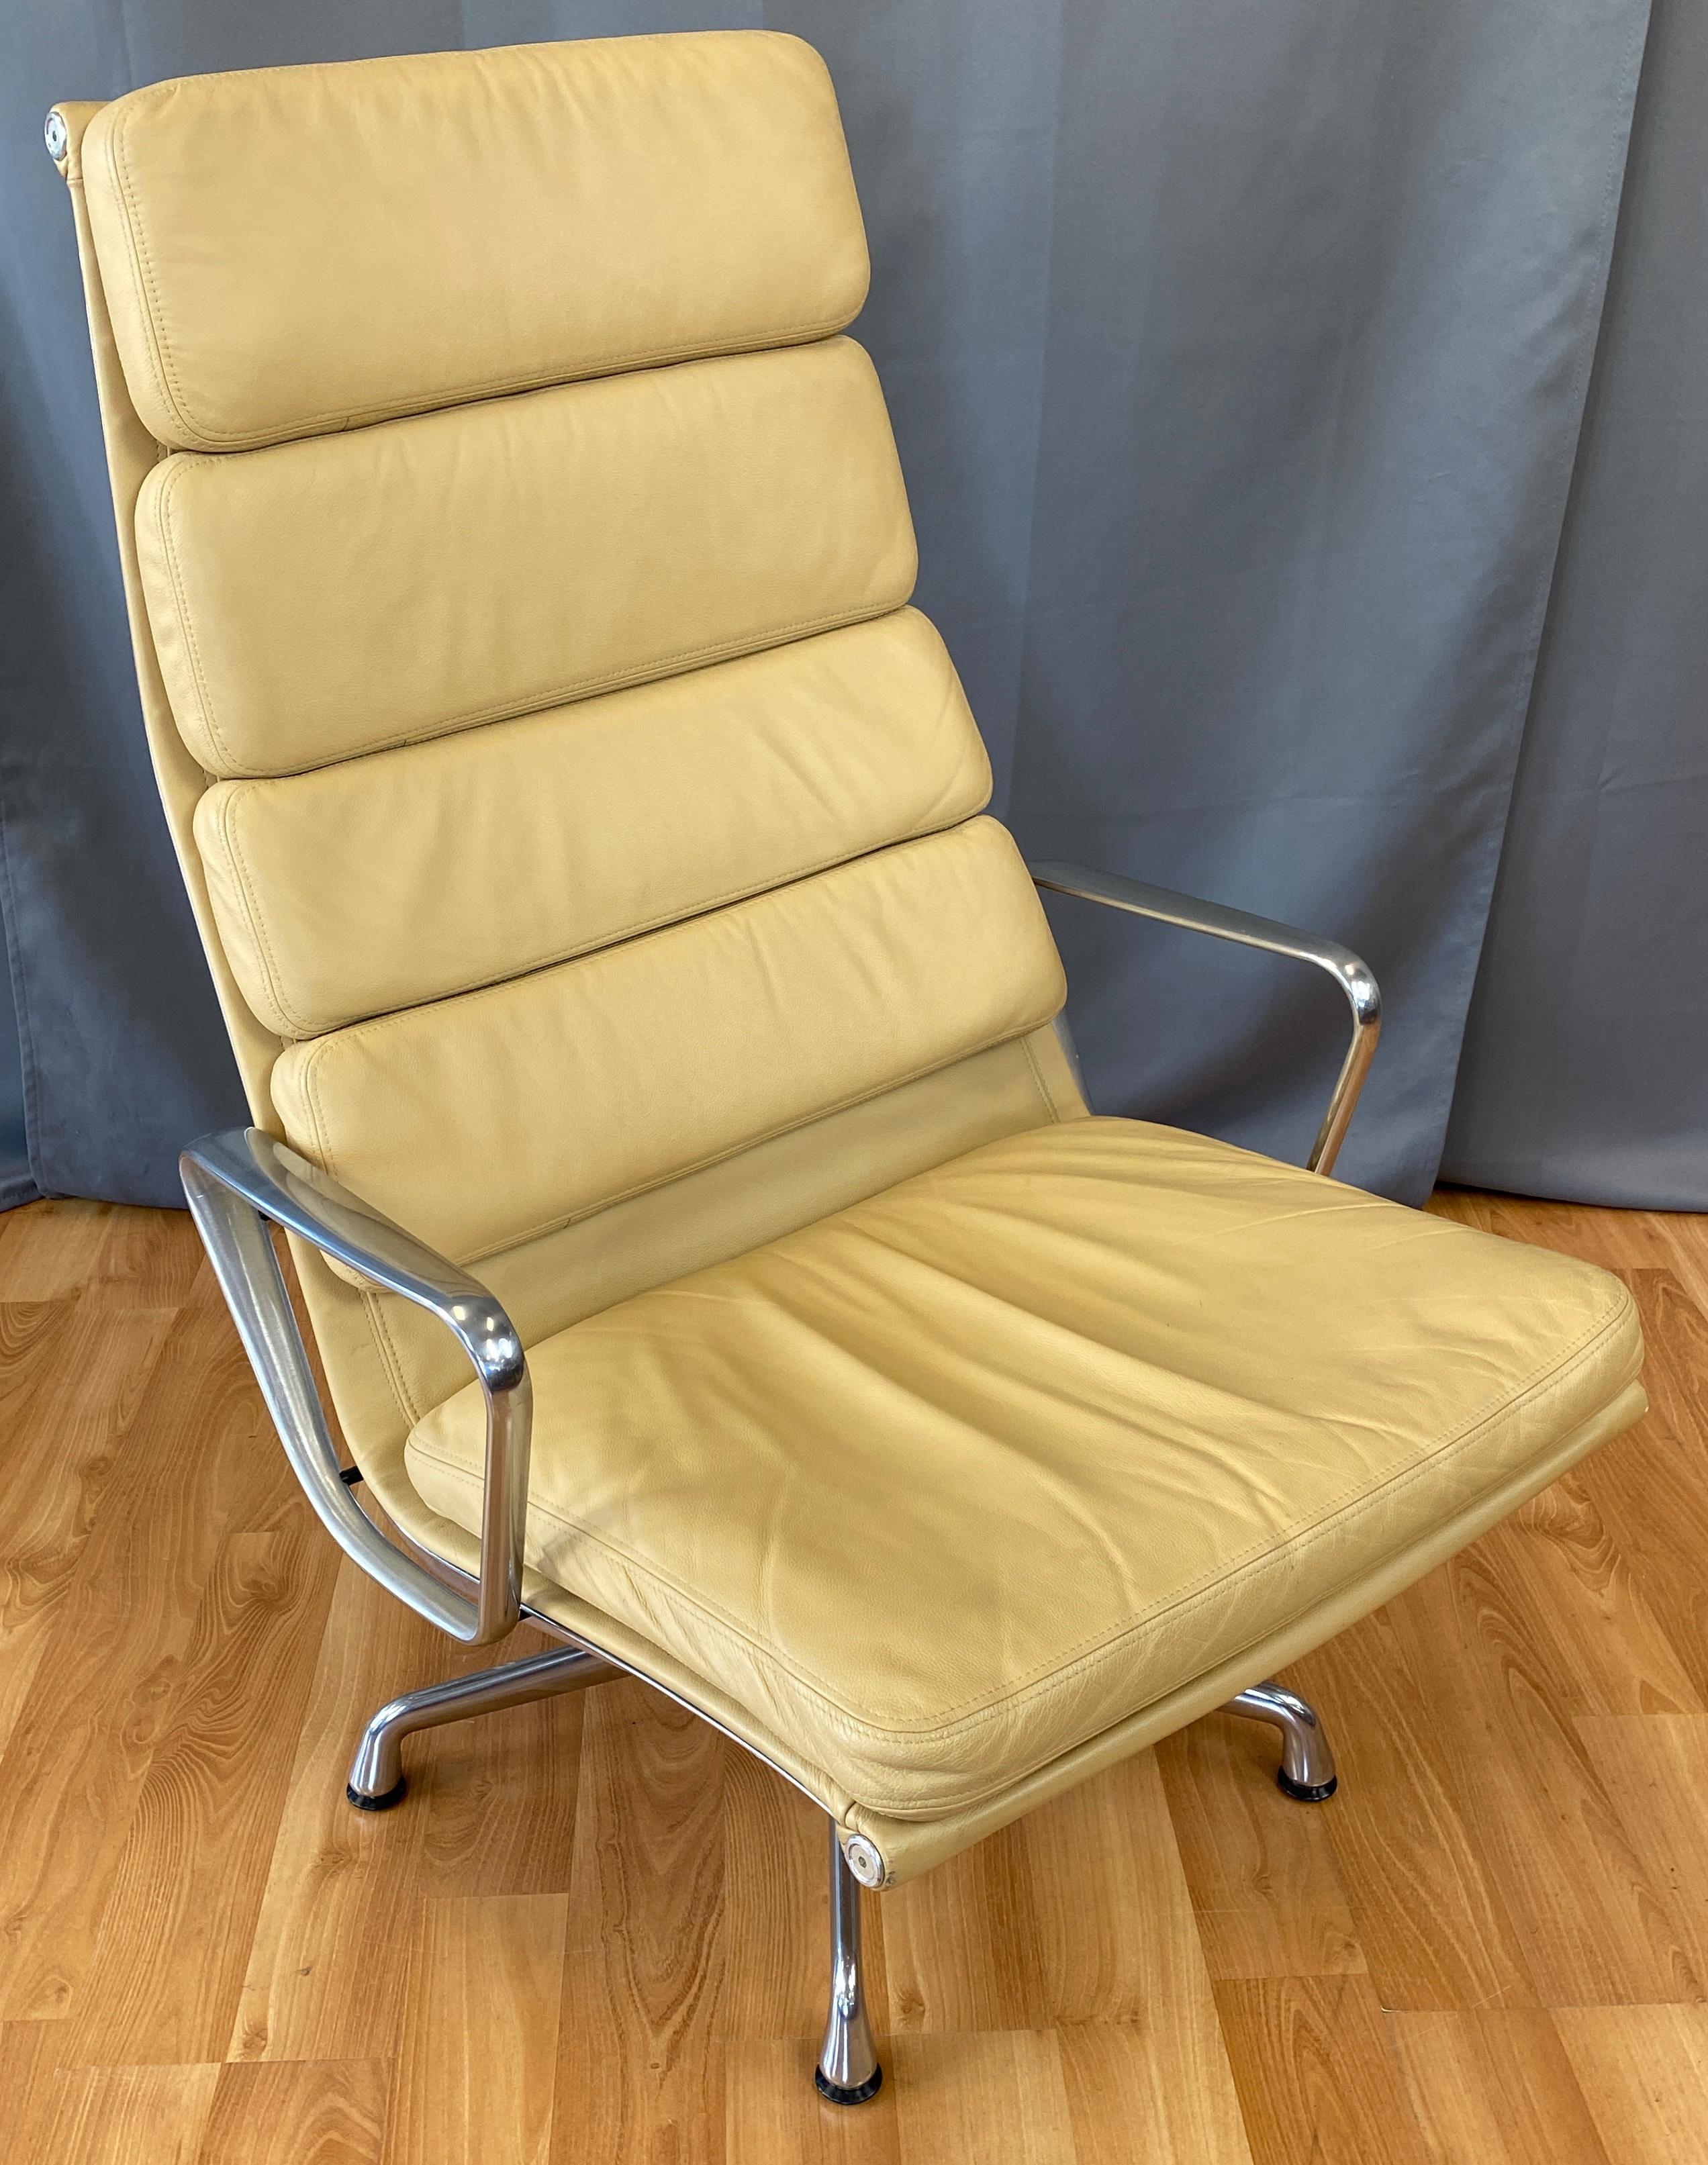 Aluminum 4 Cushion Eames Soft Pad Lounge Chair for Herman Miller in Leather